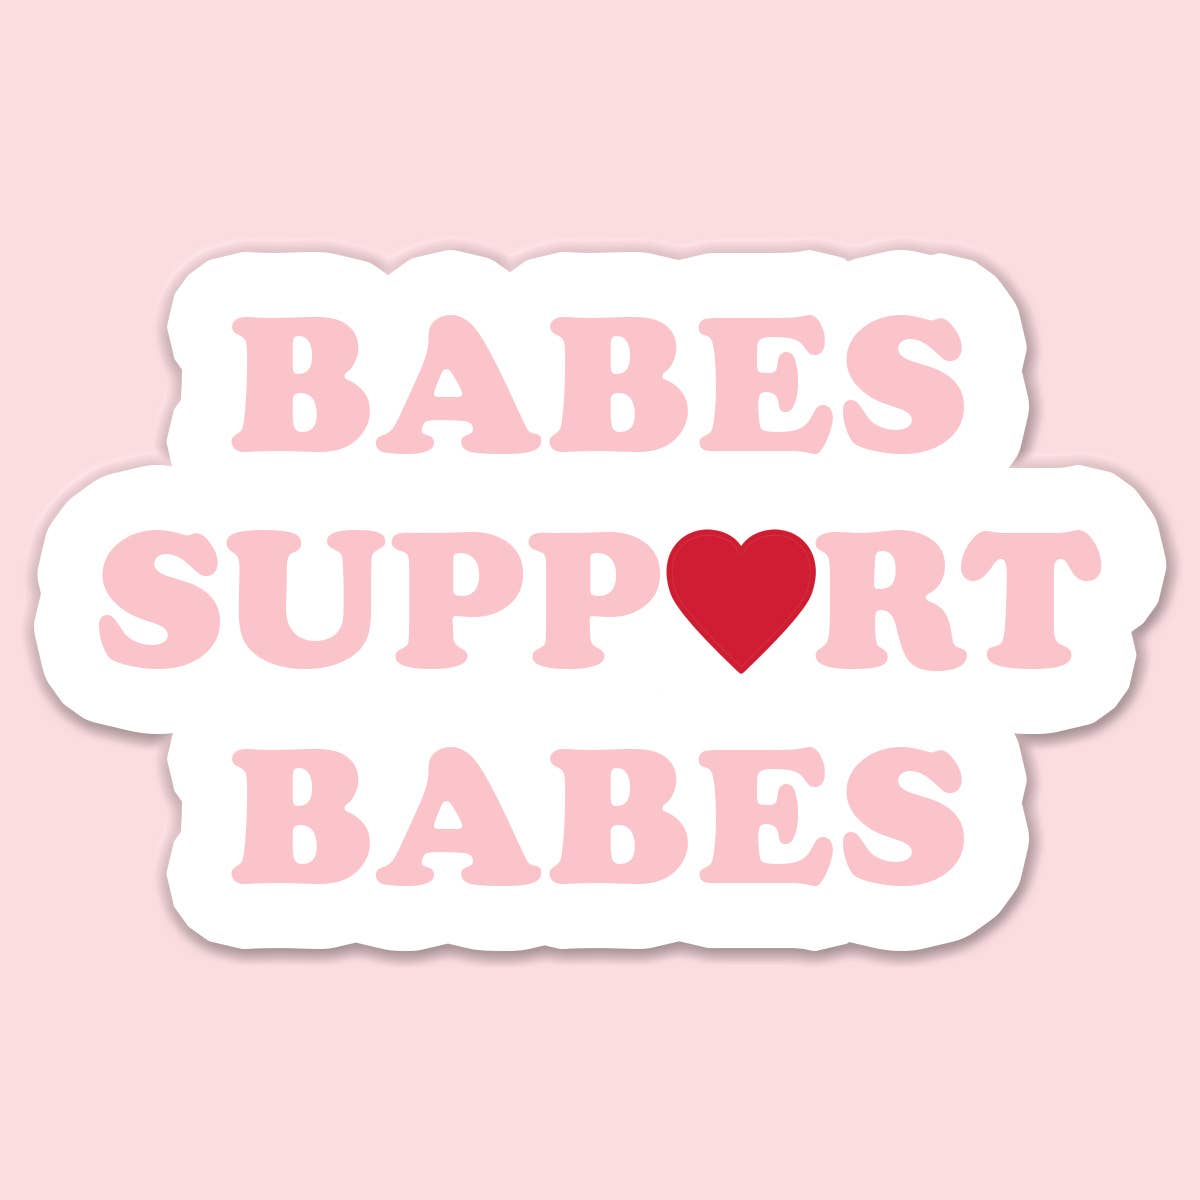 Mugsby - Babes Support Babes Sticker Decal